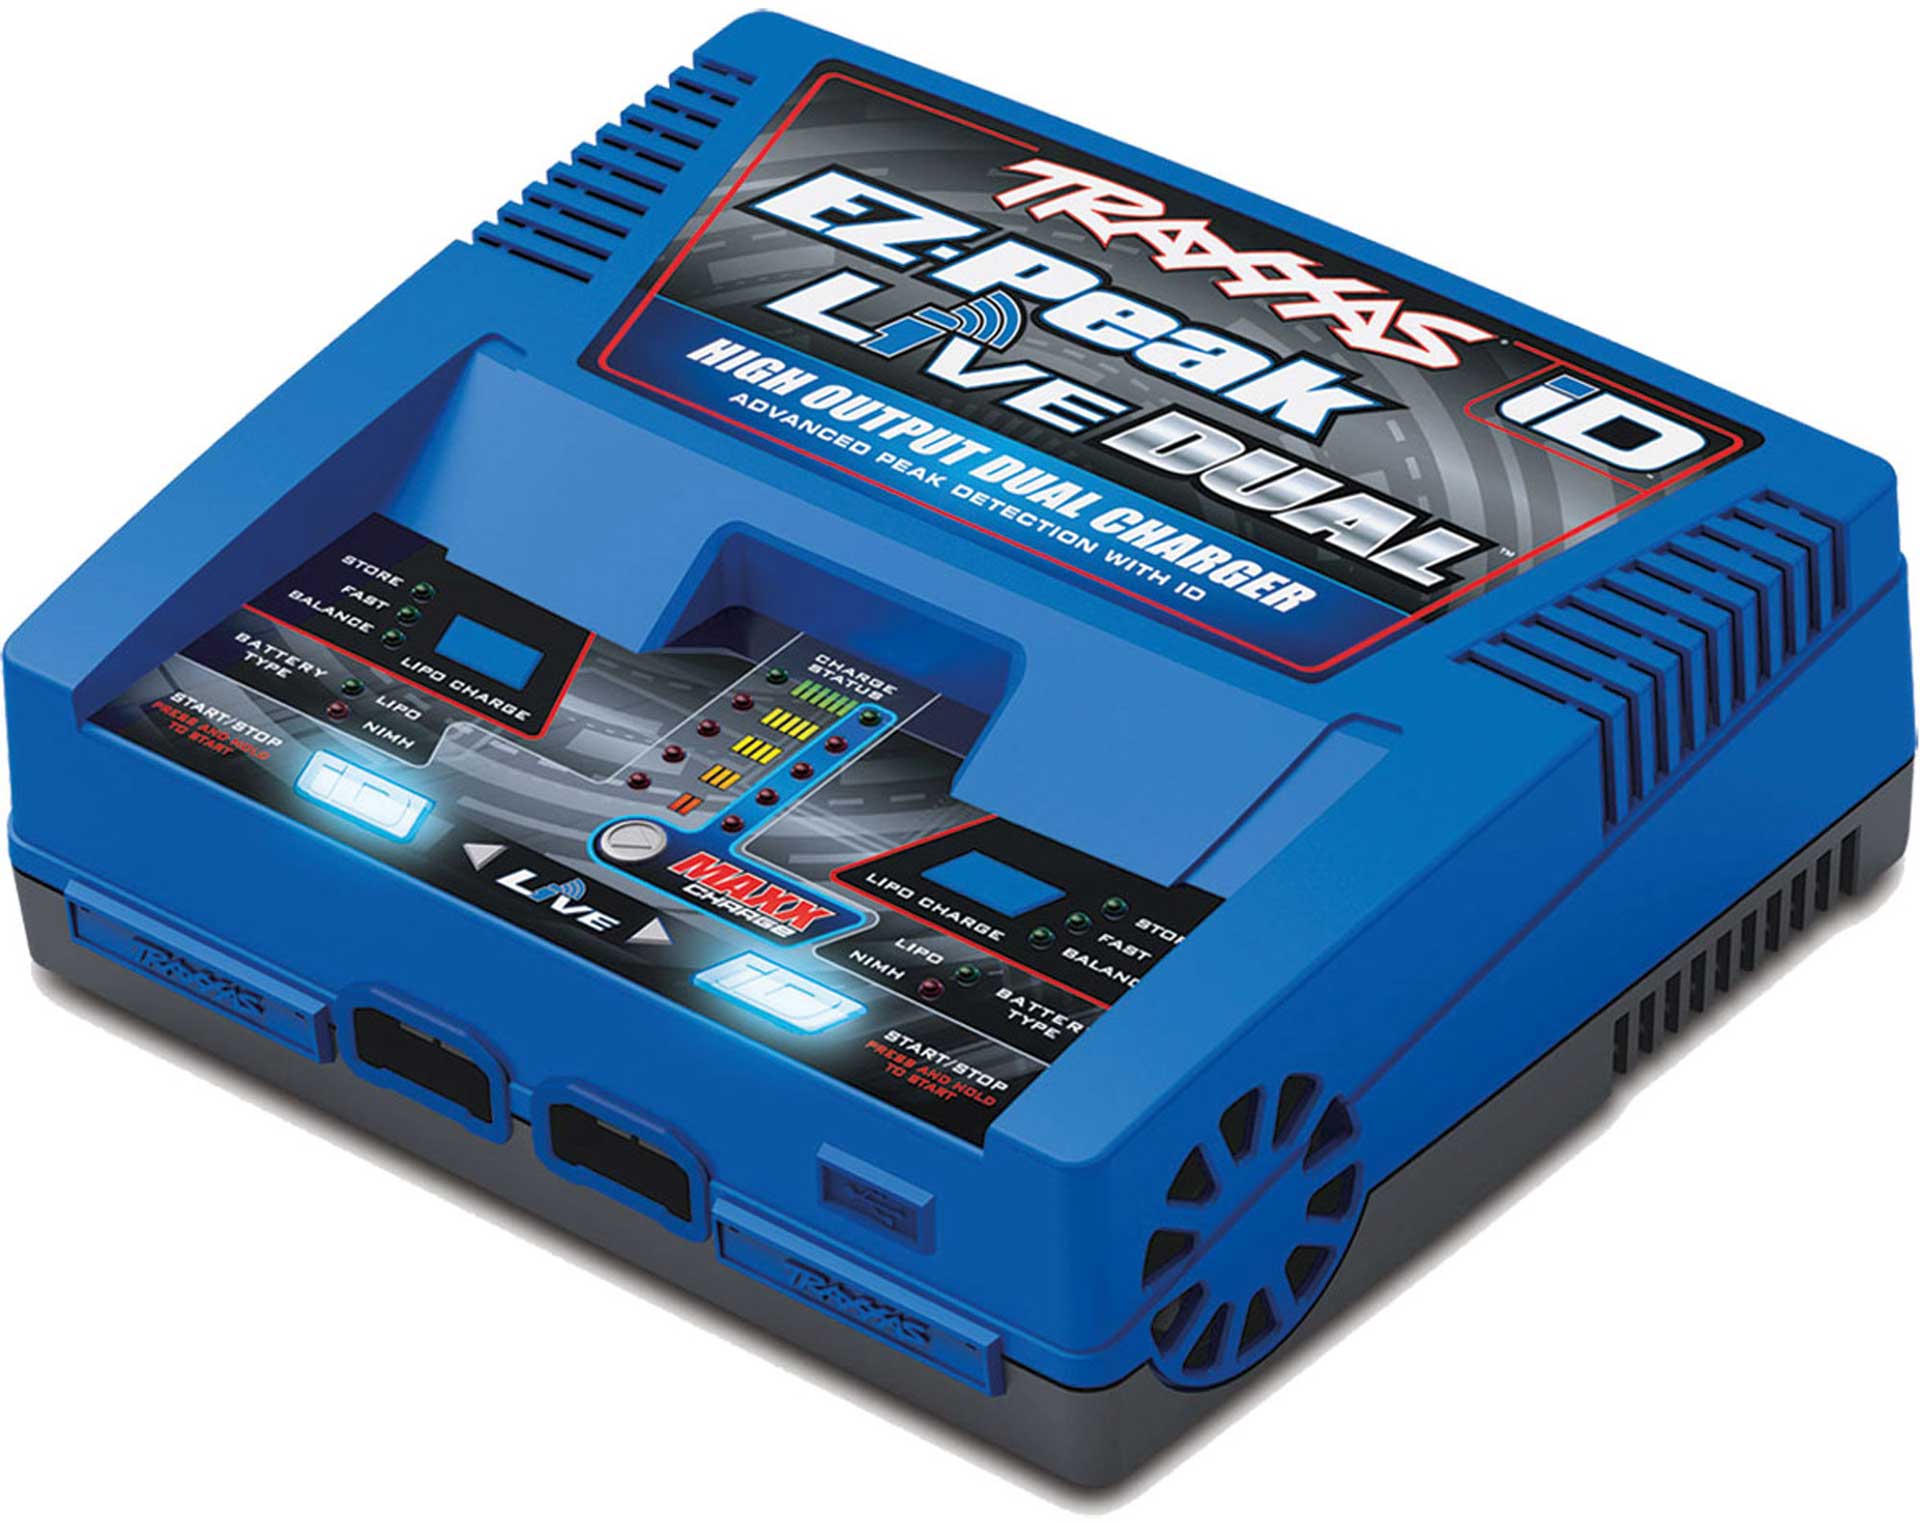 TRAXXAS DUAL EZ-PEAK LIVE 200 WATT CHARGER WITH ID BATTERY RECOGNITION NIMH/LIPO FAST CHARGER